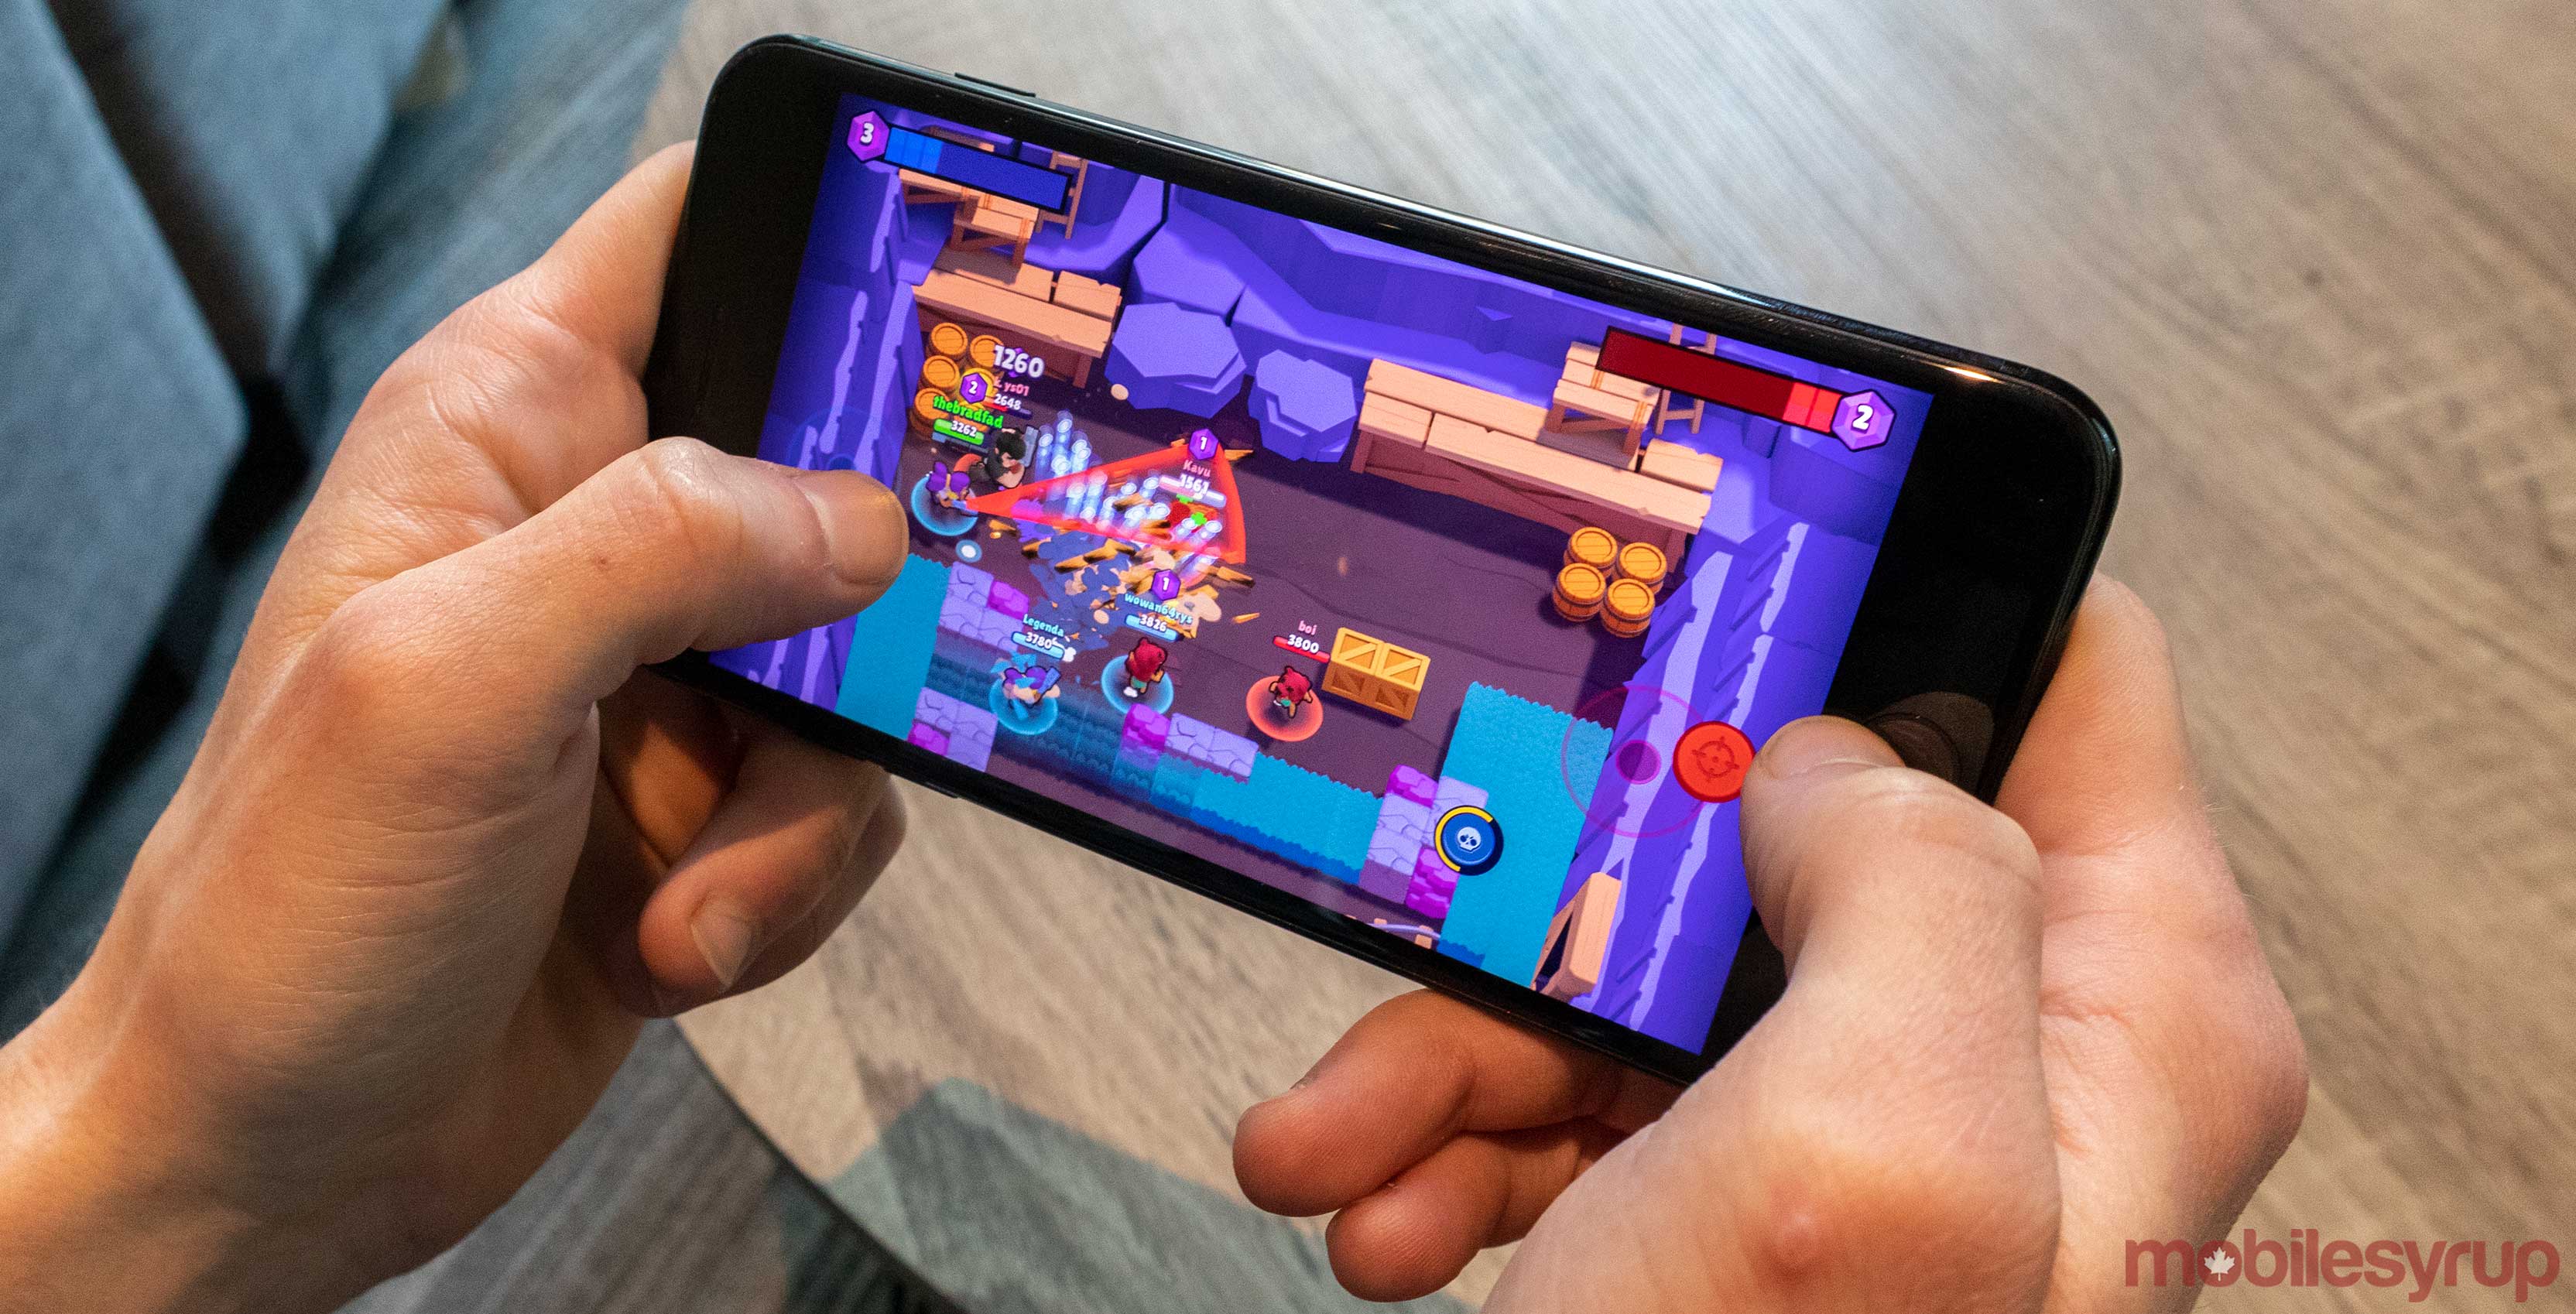 Brawl Stars shows a refreshing amount of polish [Game of the Week]